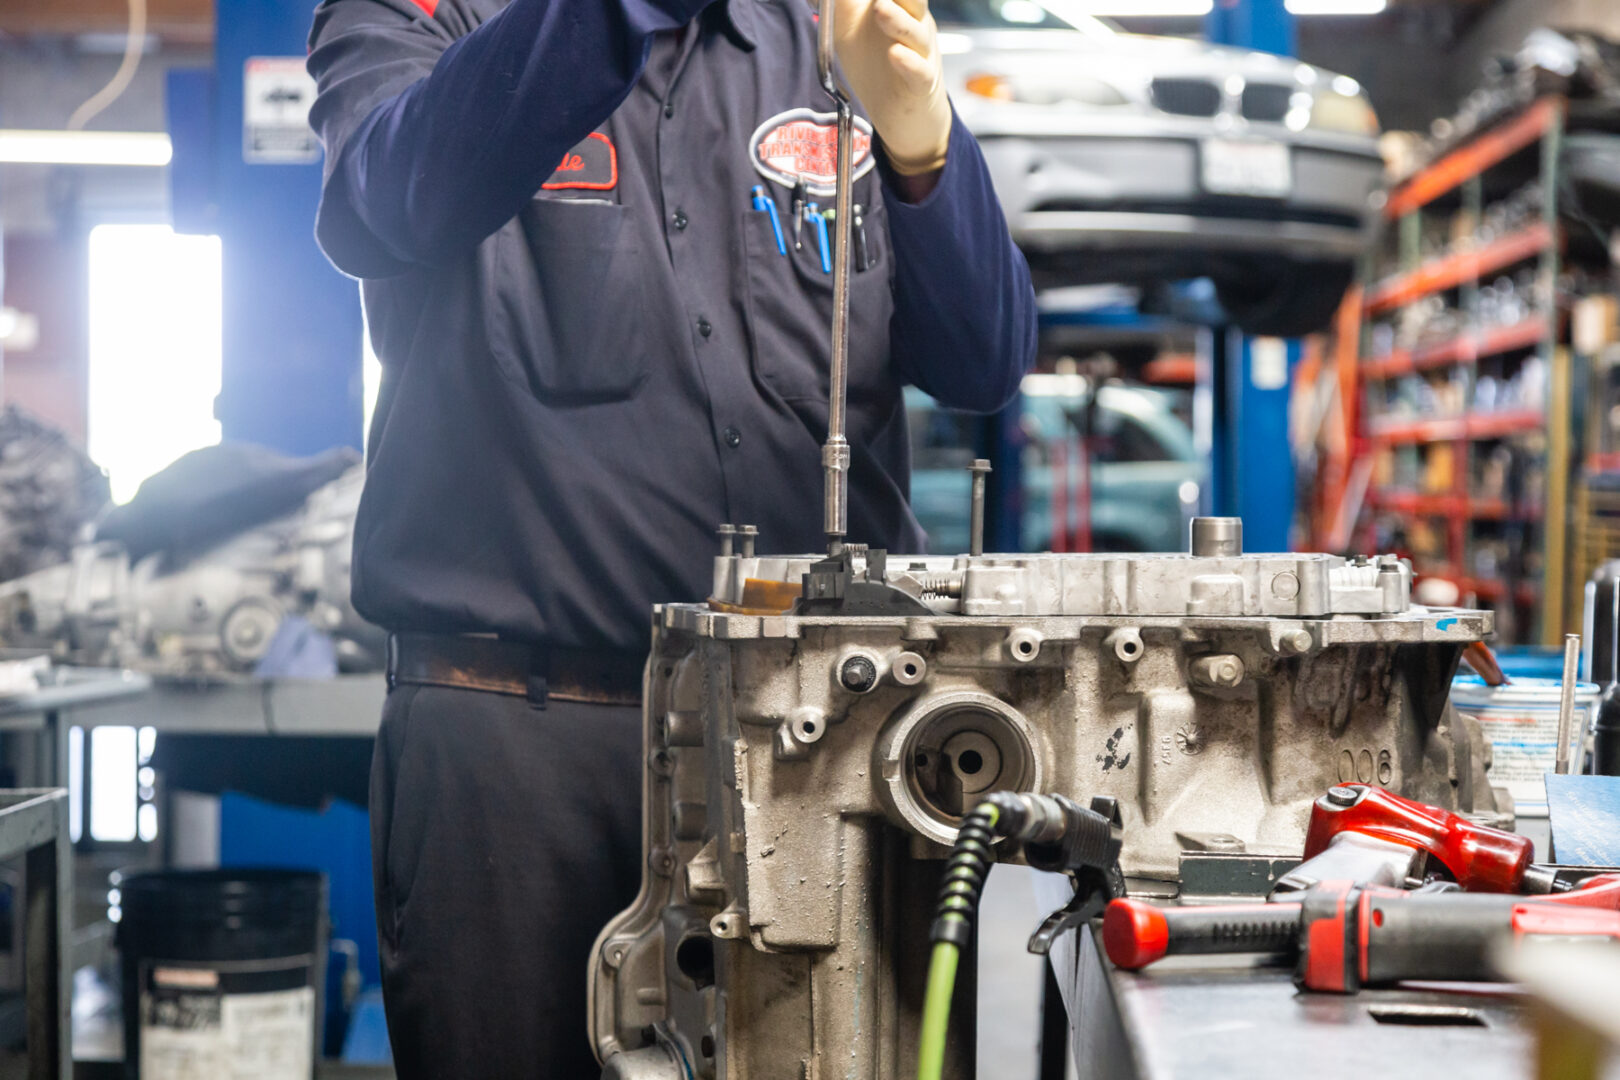 A man in blue shirt holding wrench near engine.